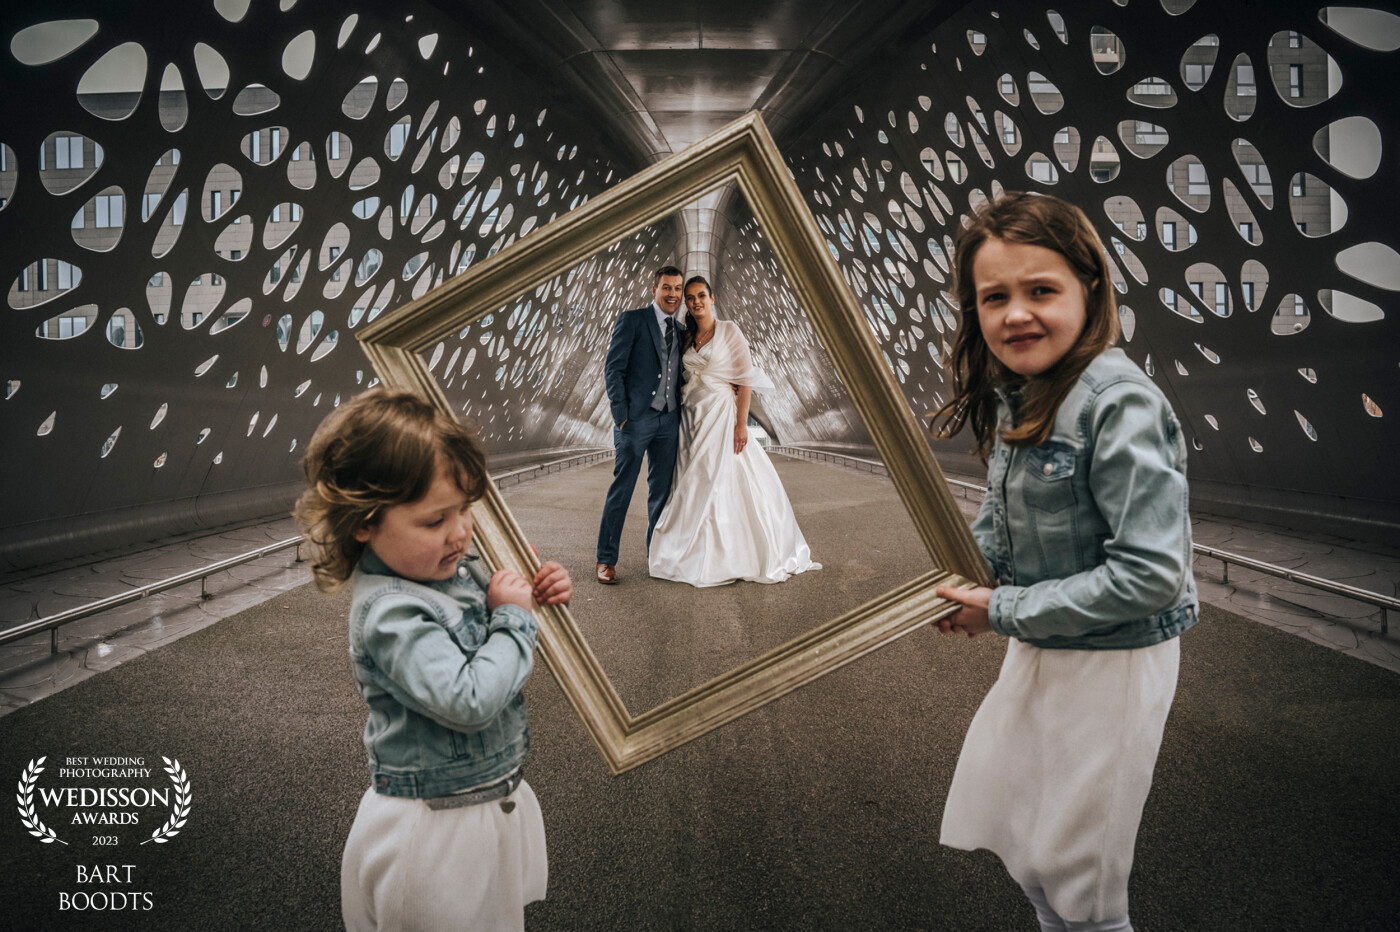 It was a cold day in winter. The bride had the idea for the children to hold this for the image. The children didn't like it at all.